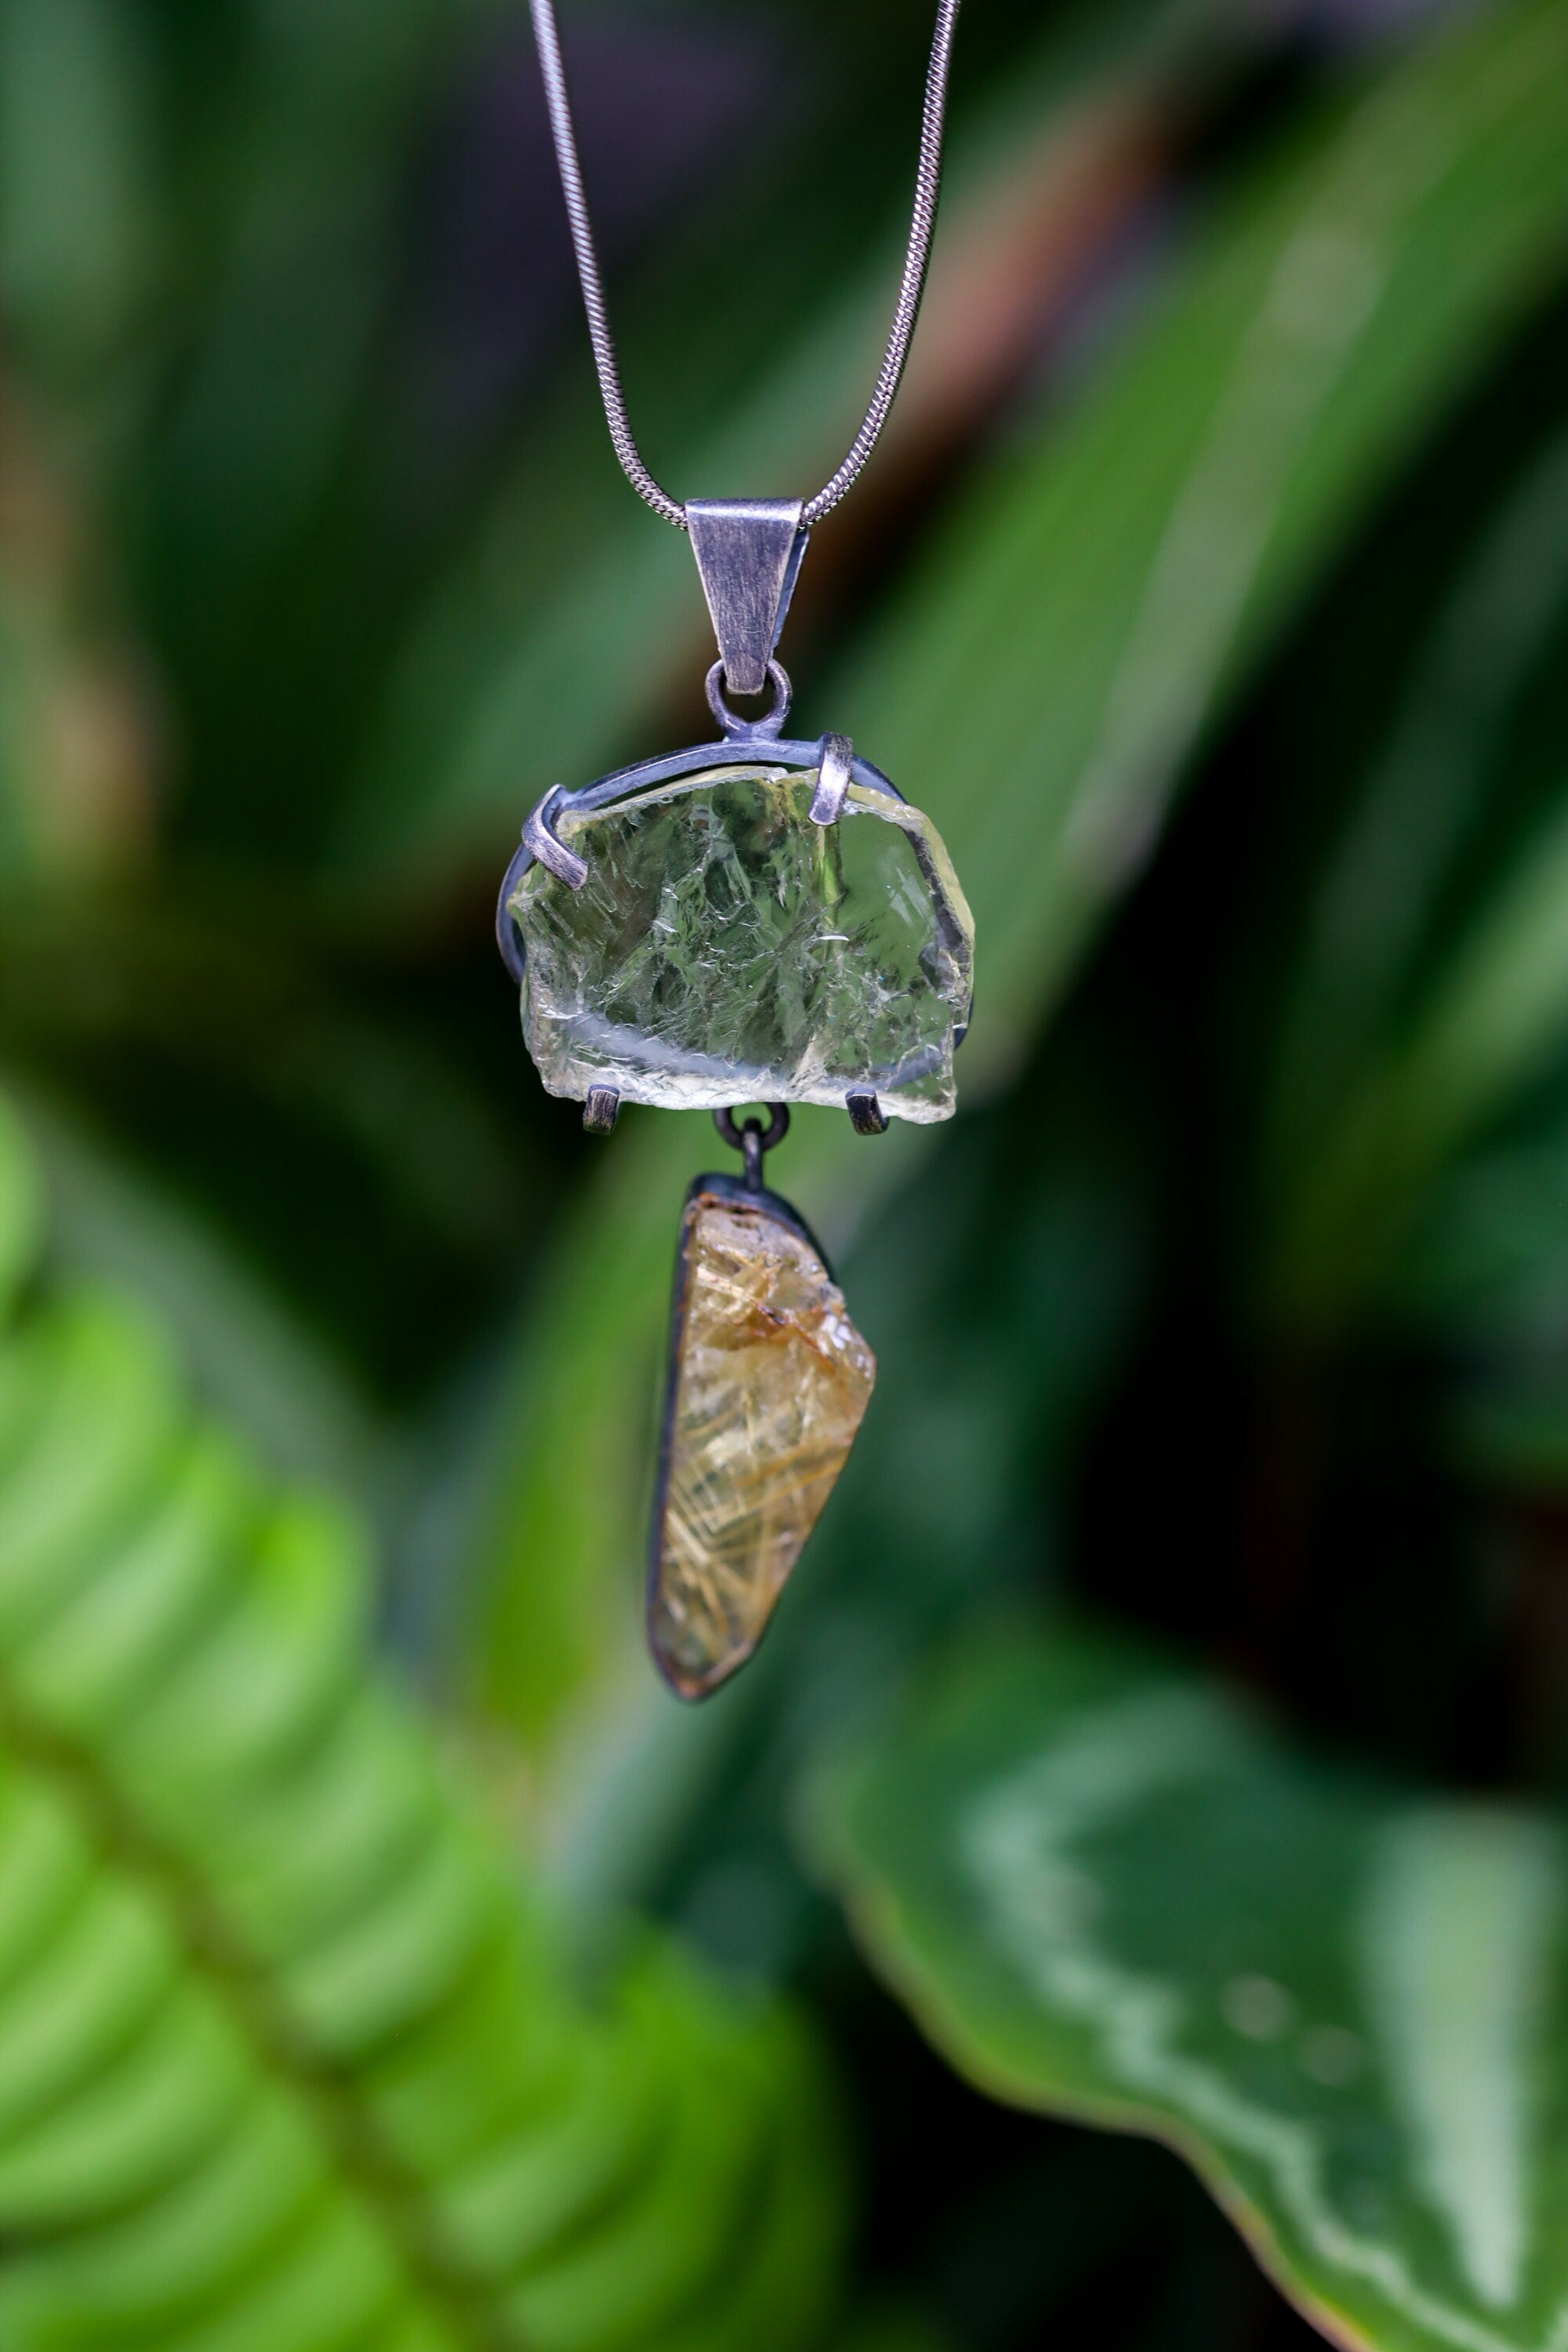 Raw Claw set Aquamarine with a freeform Gold Triangle Rutile Quartz - Sterling Silver dangle Crystal Pendant - Brush Textured & Oxidized